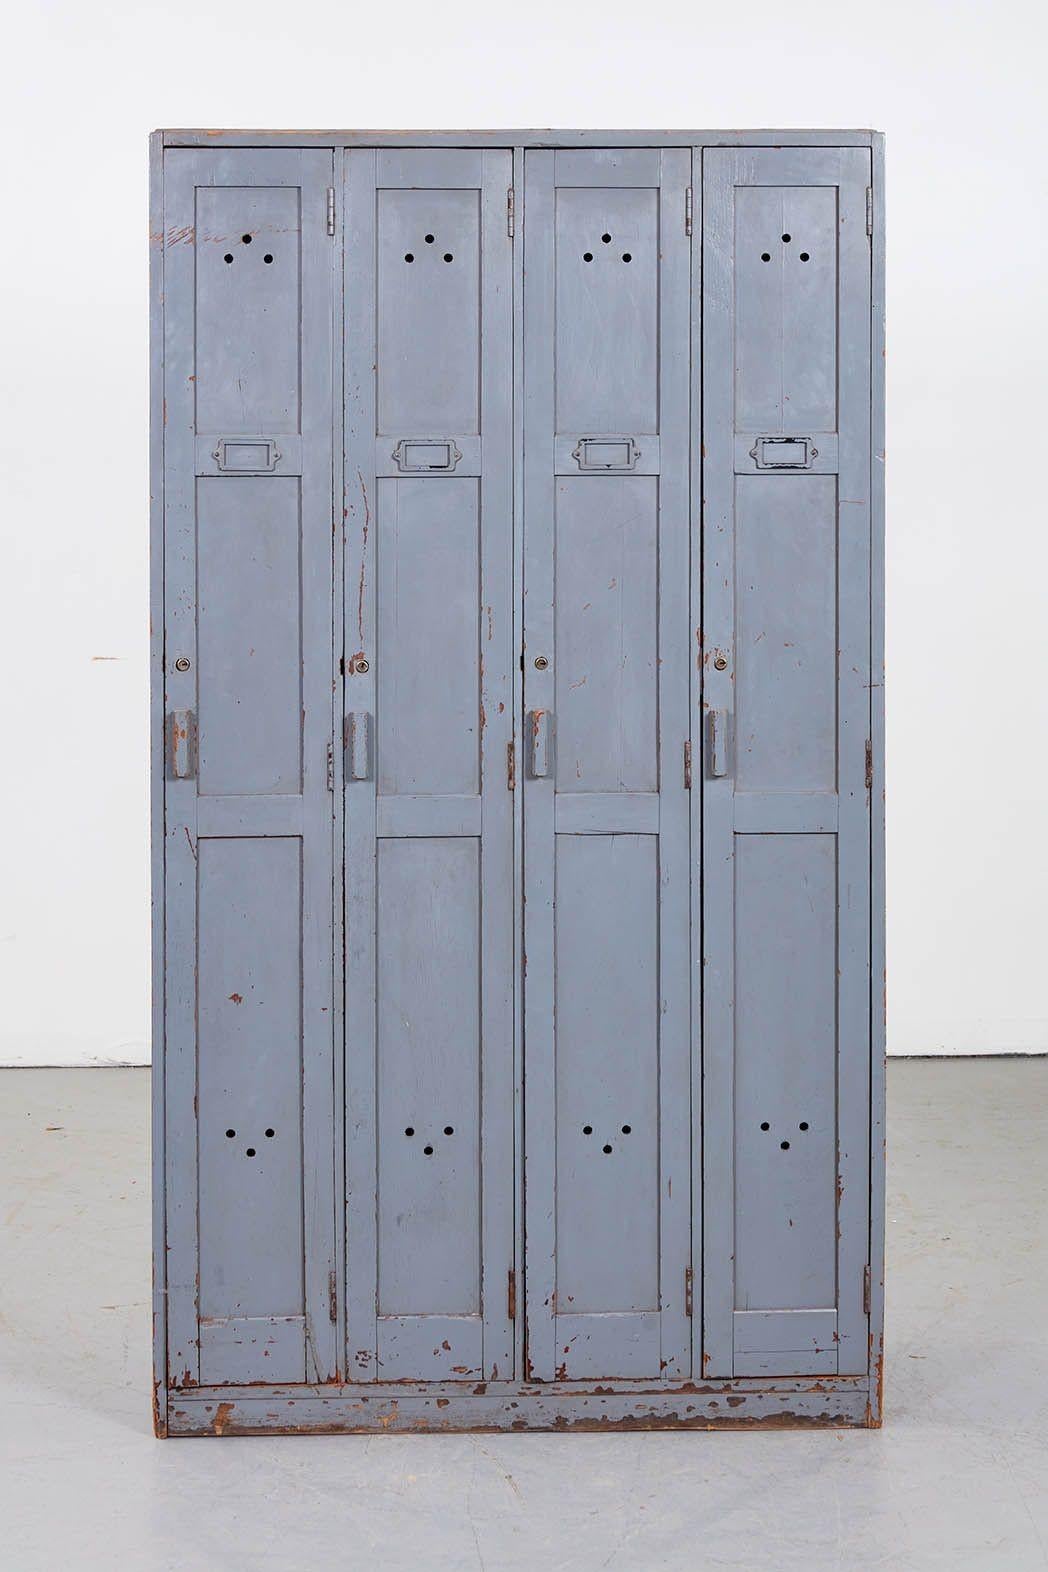 A vintage wooden Post Office locker unit comprising four lockers having paneled doors with wooden handles, locks, name plate holders and air holes. In old Post Office gray paint. Useful narrow proportions. A conversation piece as well as a